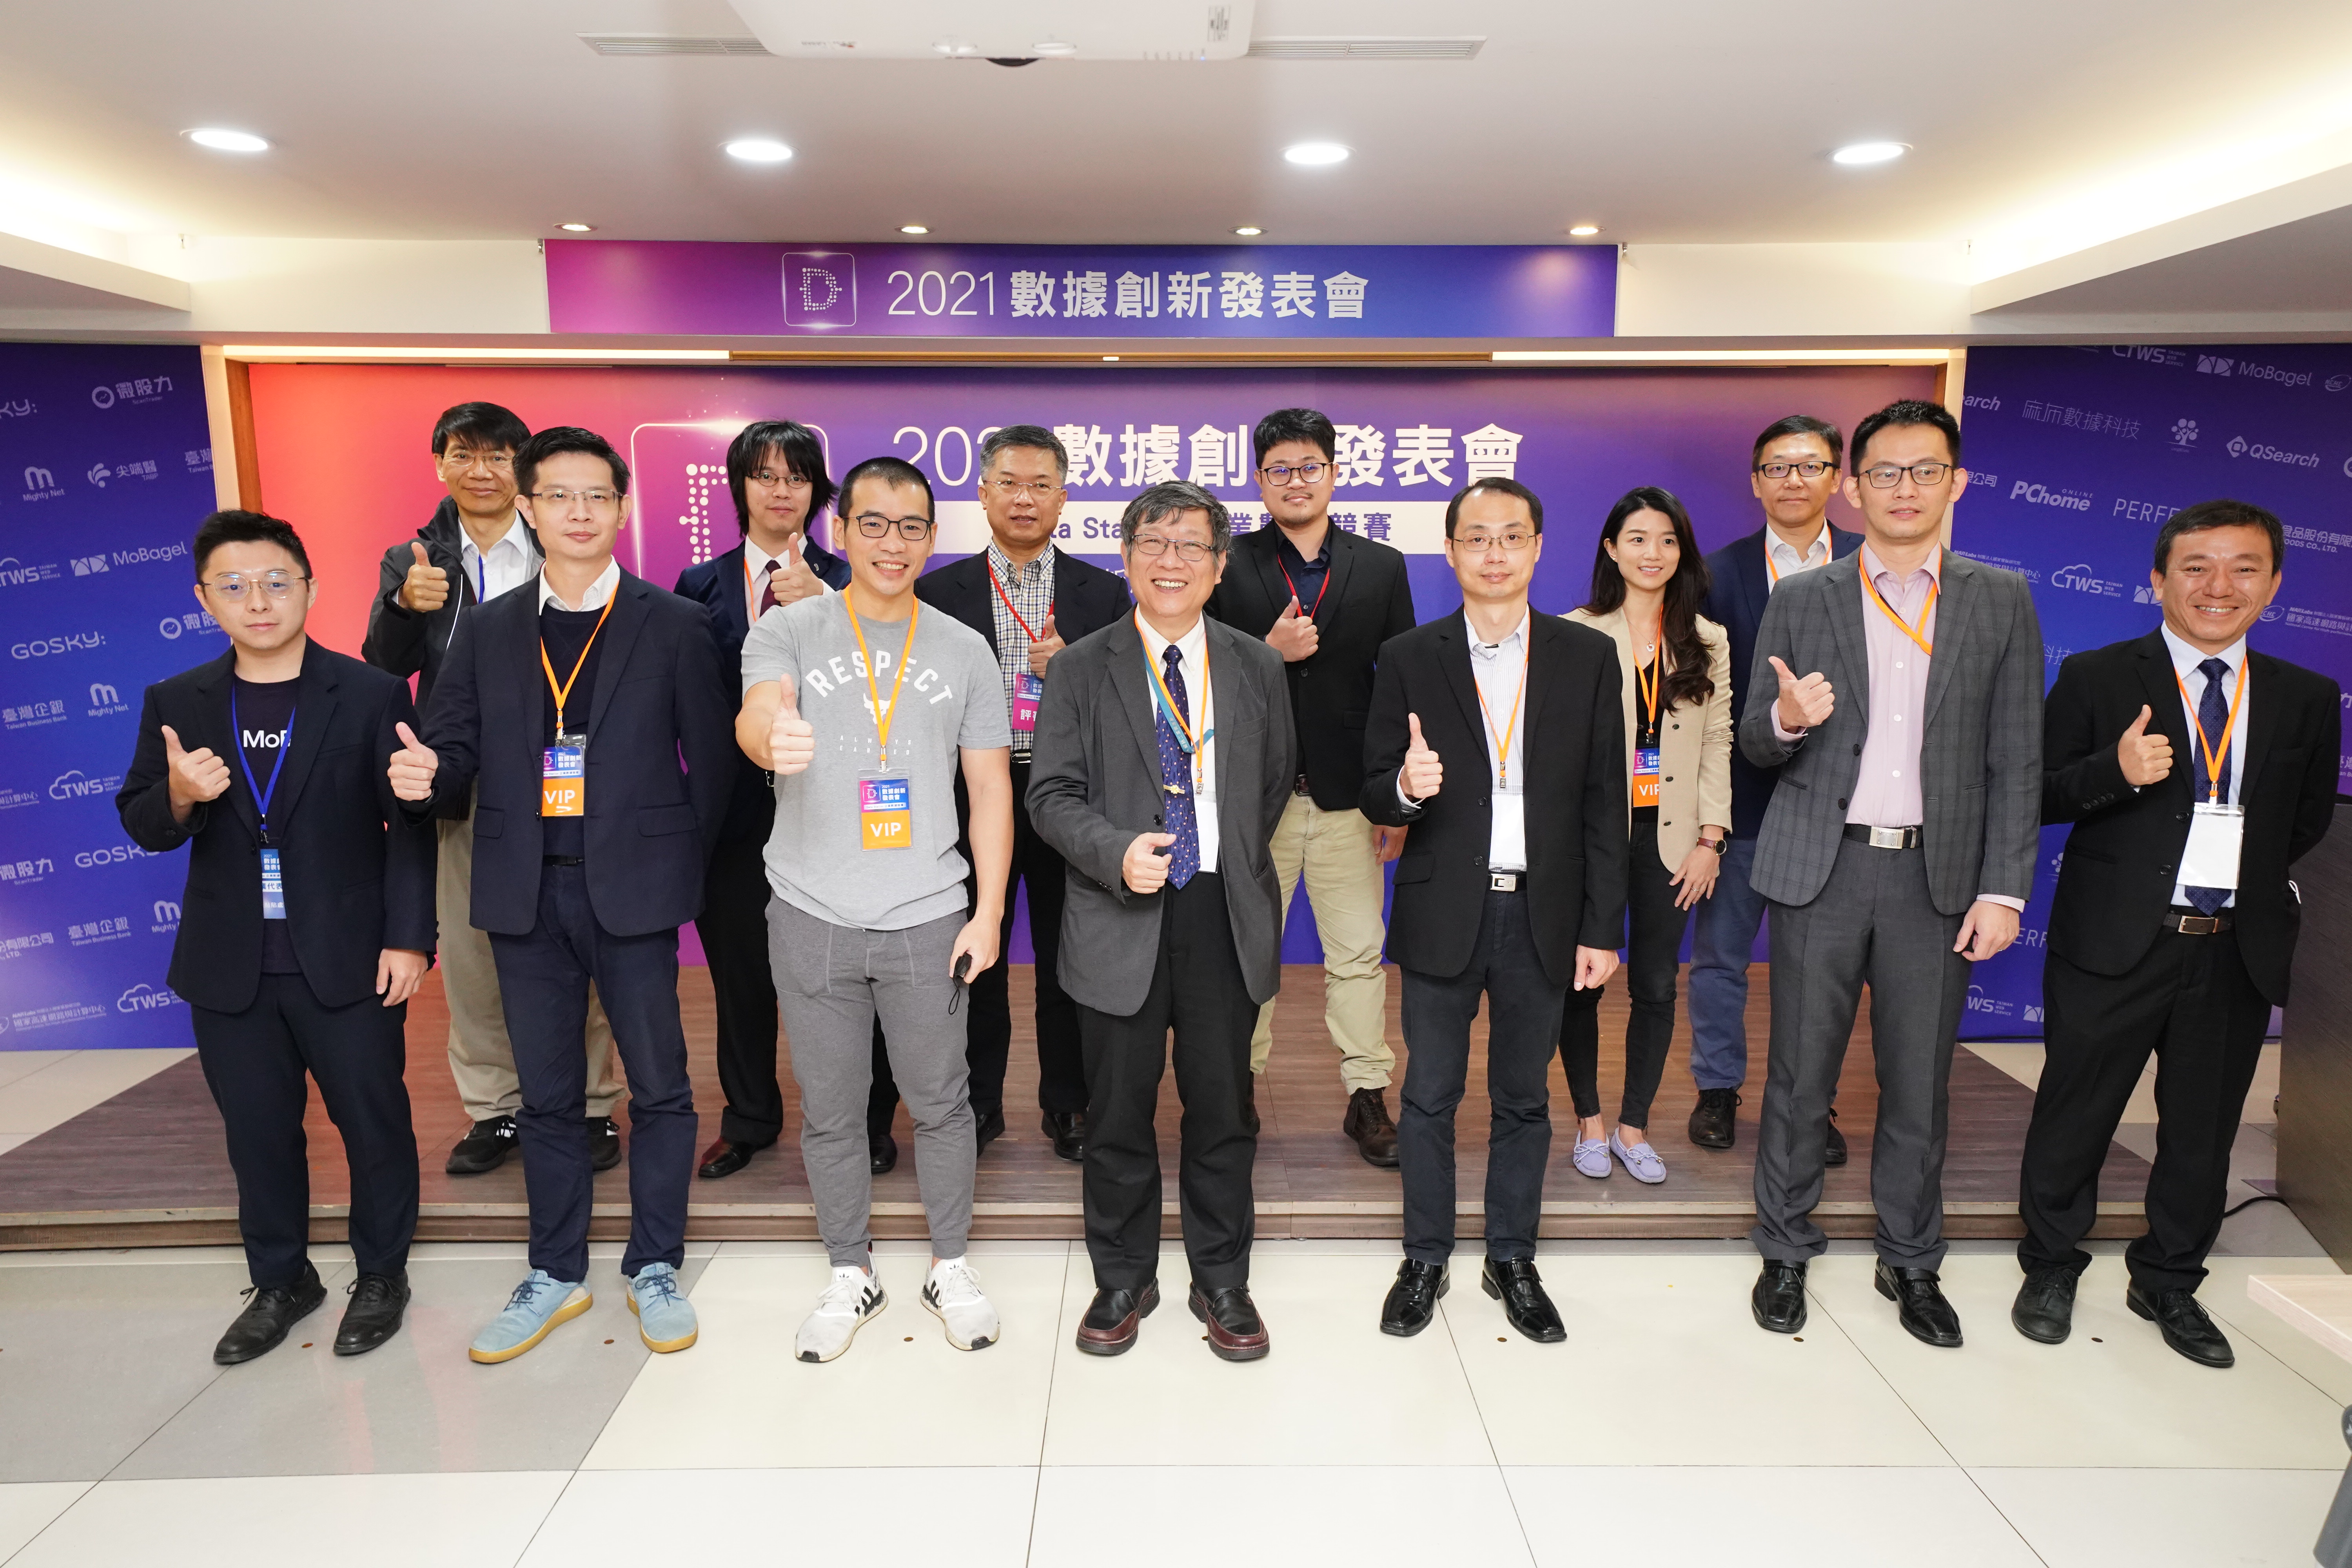 Project Investigator Fang-Pang Lin (first from the left in the back row) of National Center for High-performance Computing participated in the opening ceremony of the 2021 Data Station